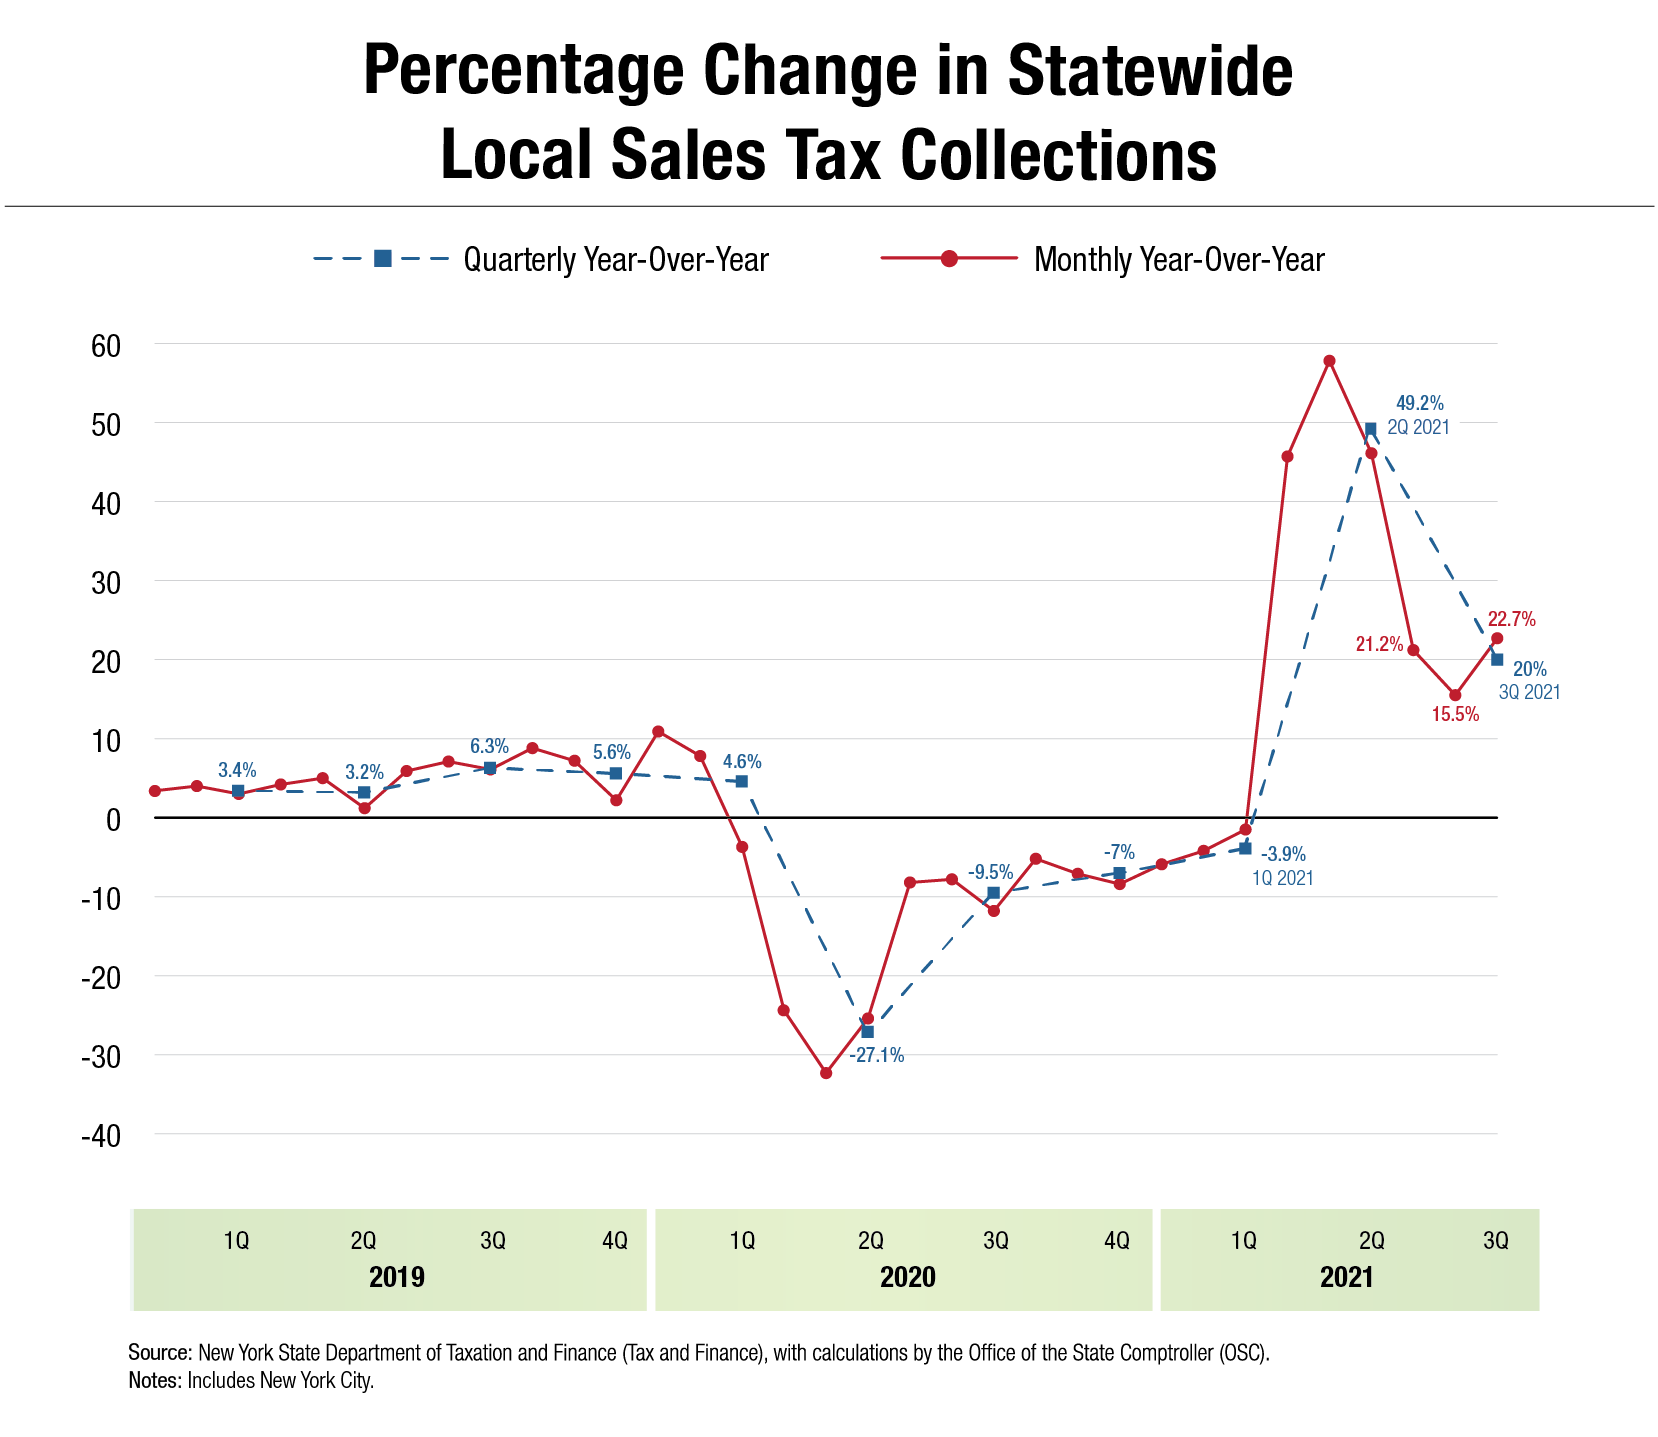 Percentage Change in Statewide Local Sales Taxes - October 2021